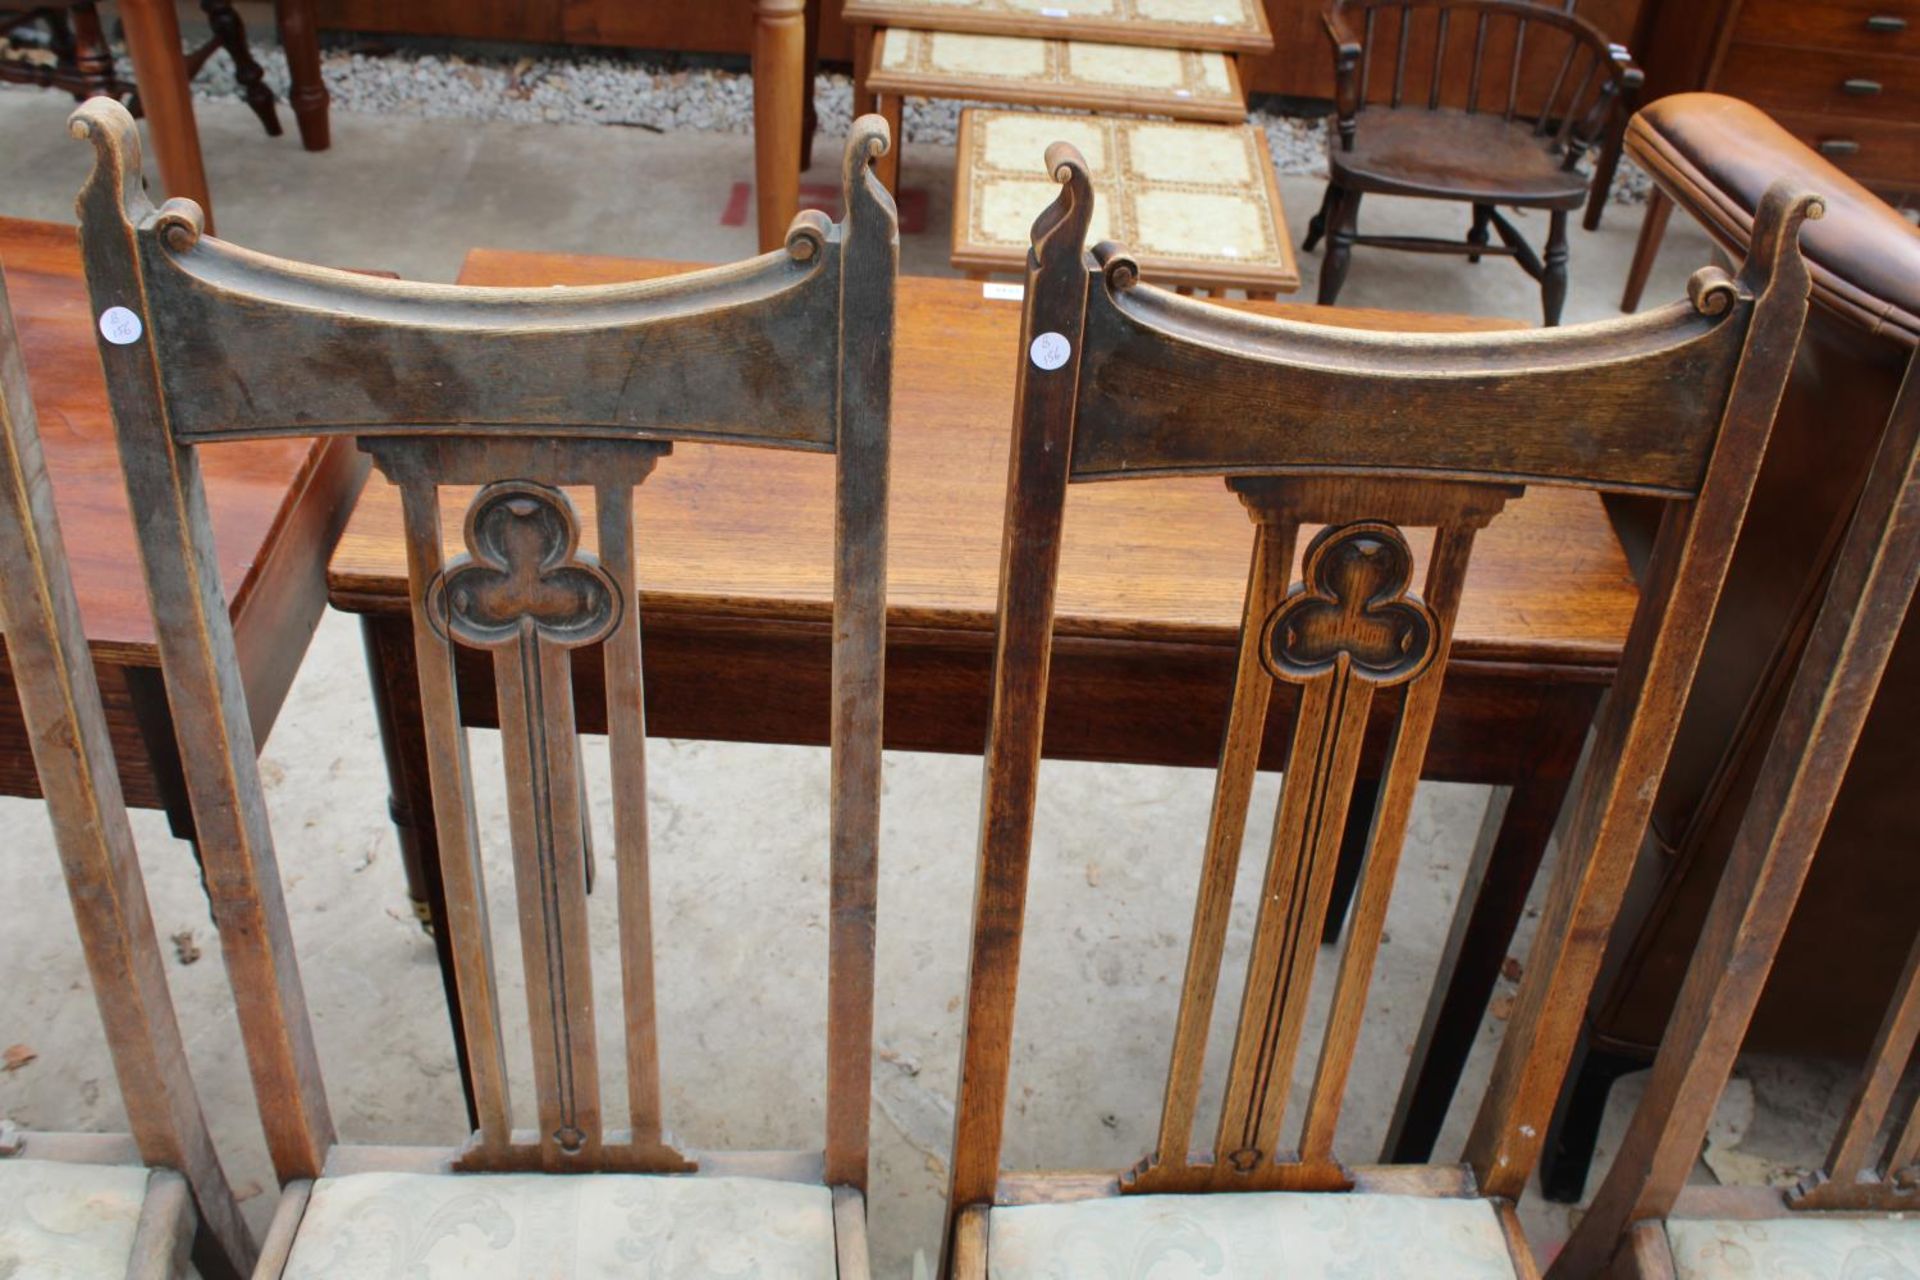 FOUR OAK ART NOUVEAU DINING CHAIRS AND SIMILAR CARVER CHAIR - Image 3 of 3